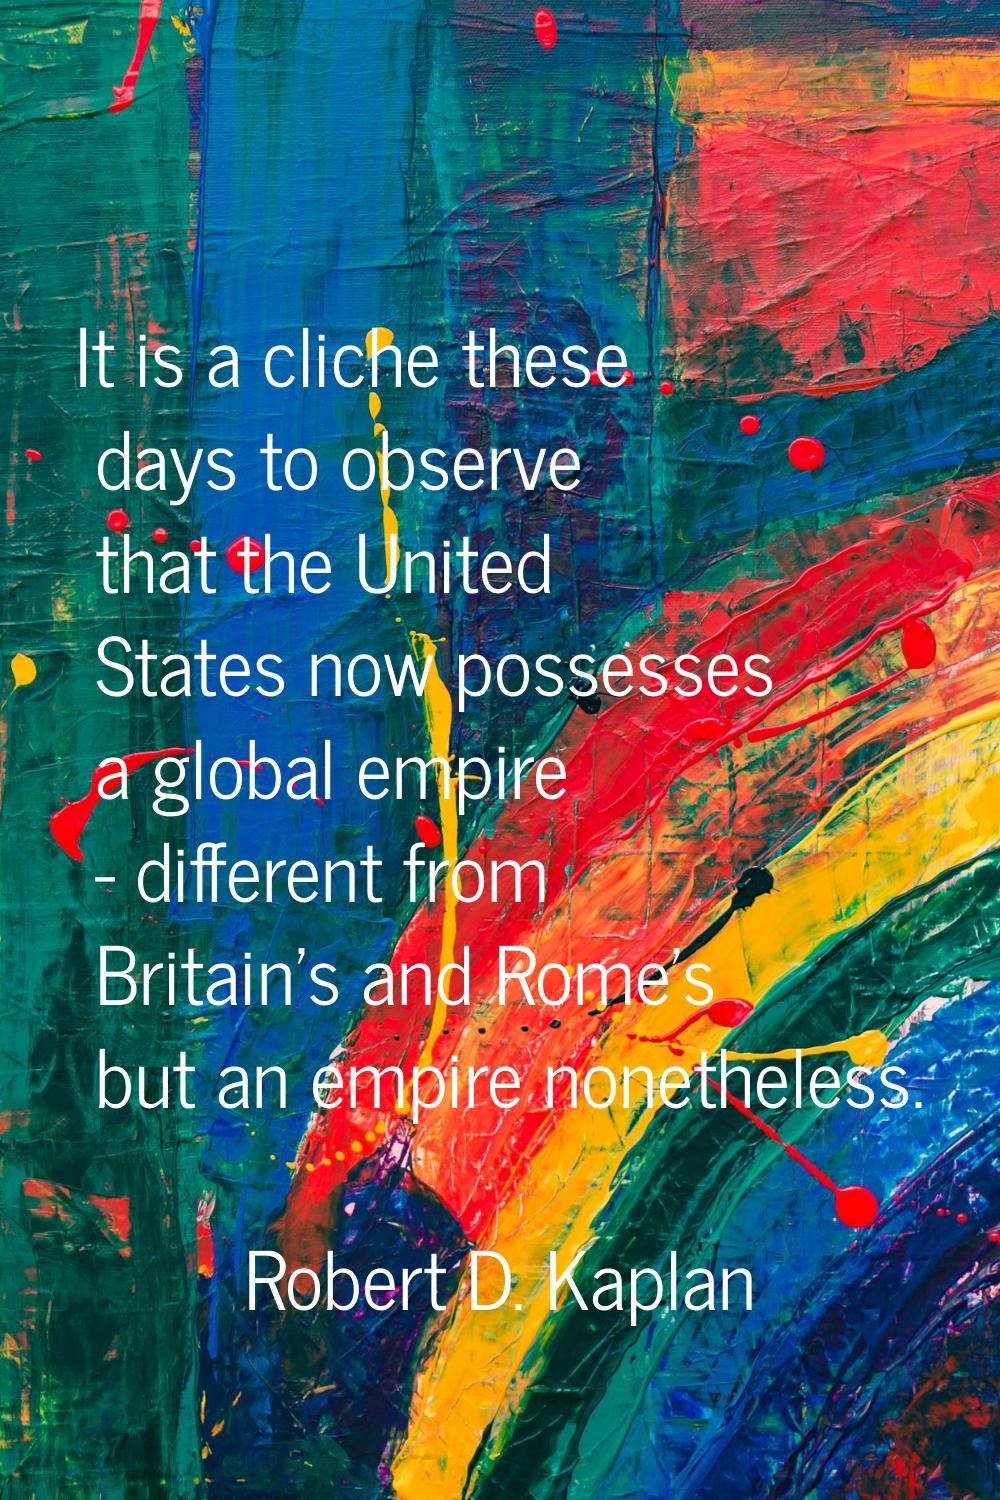 It is a cliche these days to observe that the United States now possesses a global empire - differe